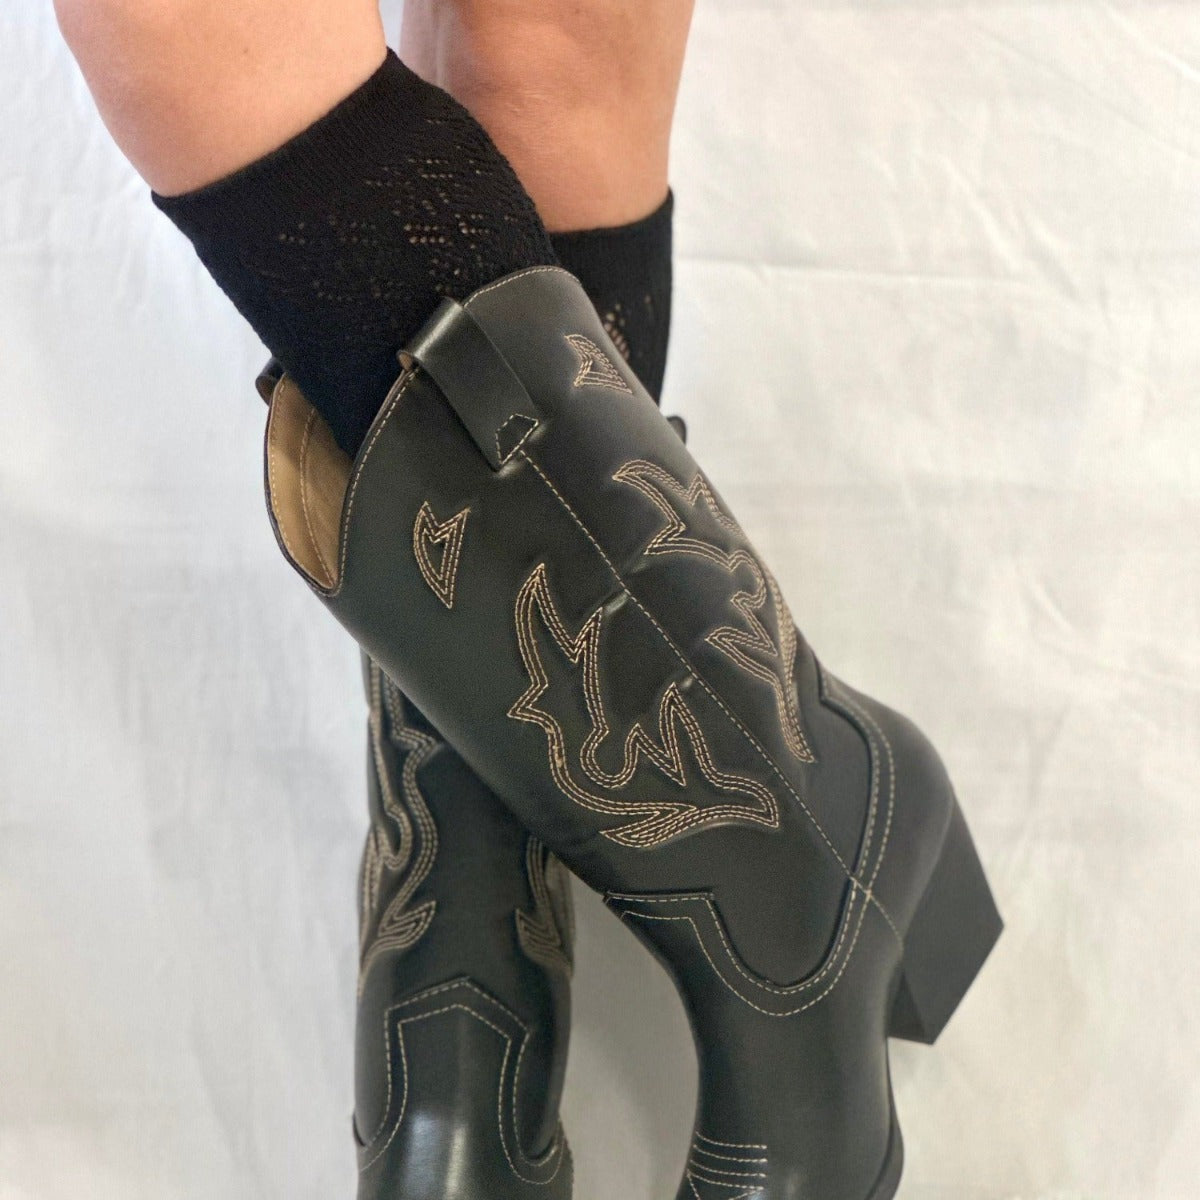 what socks to wear with western cowboy boots, socks to wear with cowboy western boots, Catherine Cole designer quality socks for women